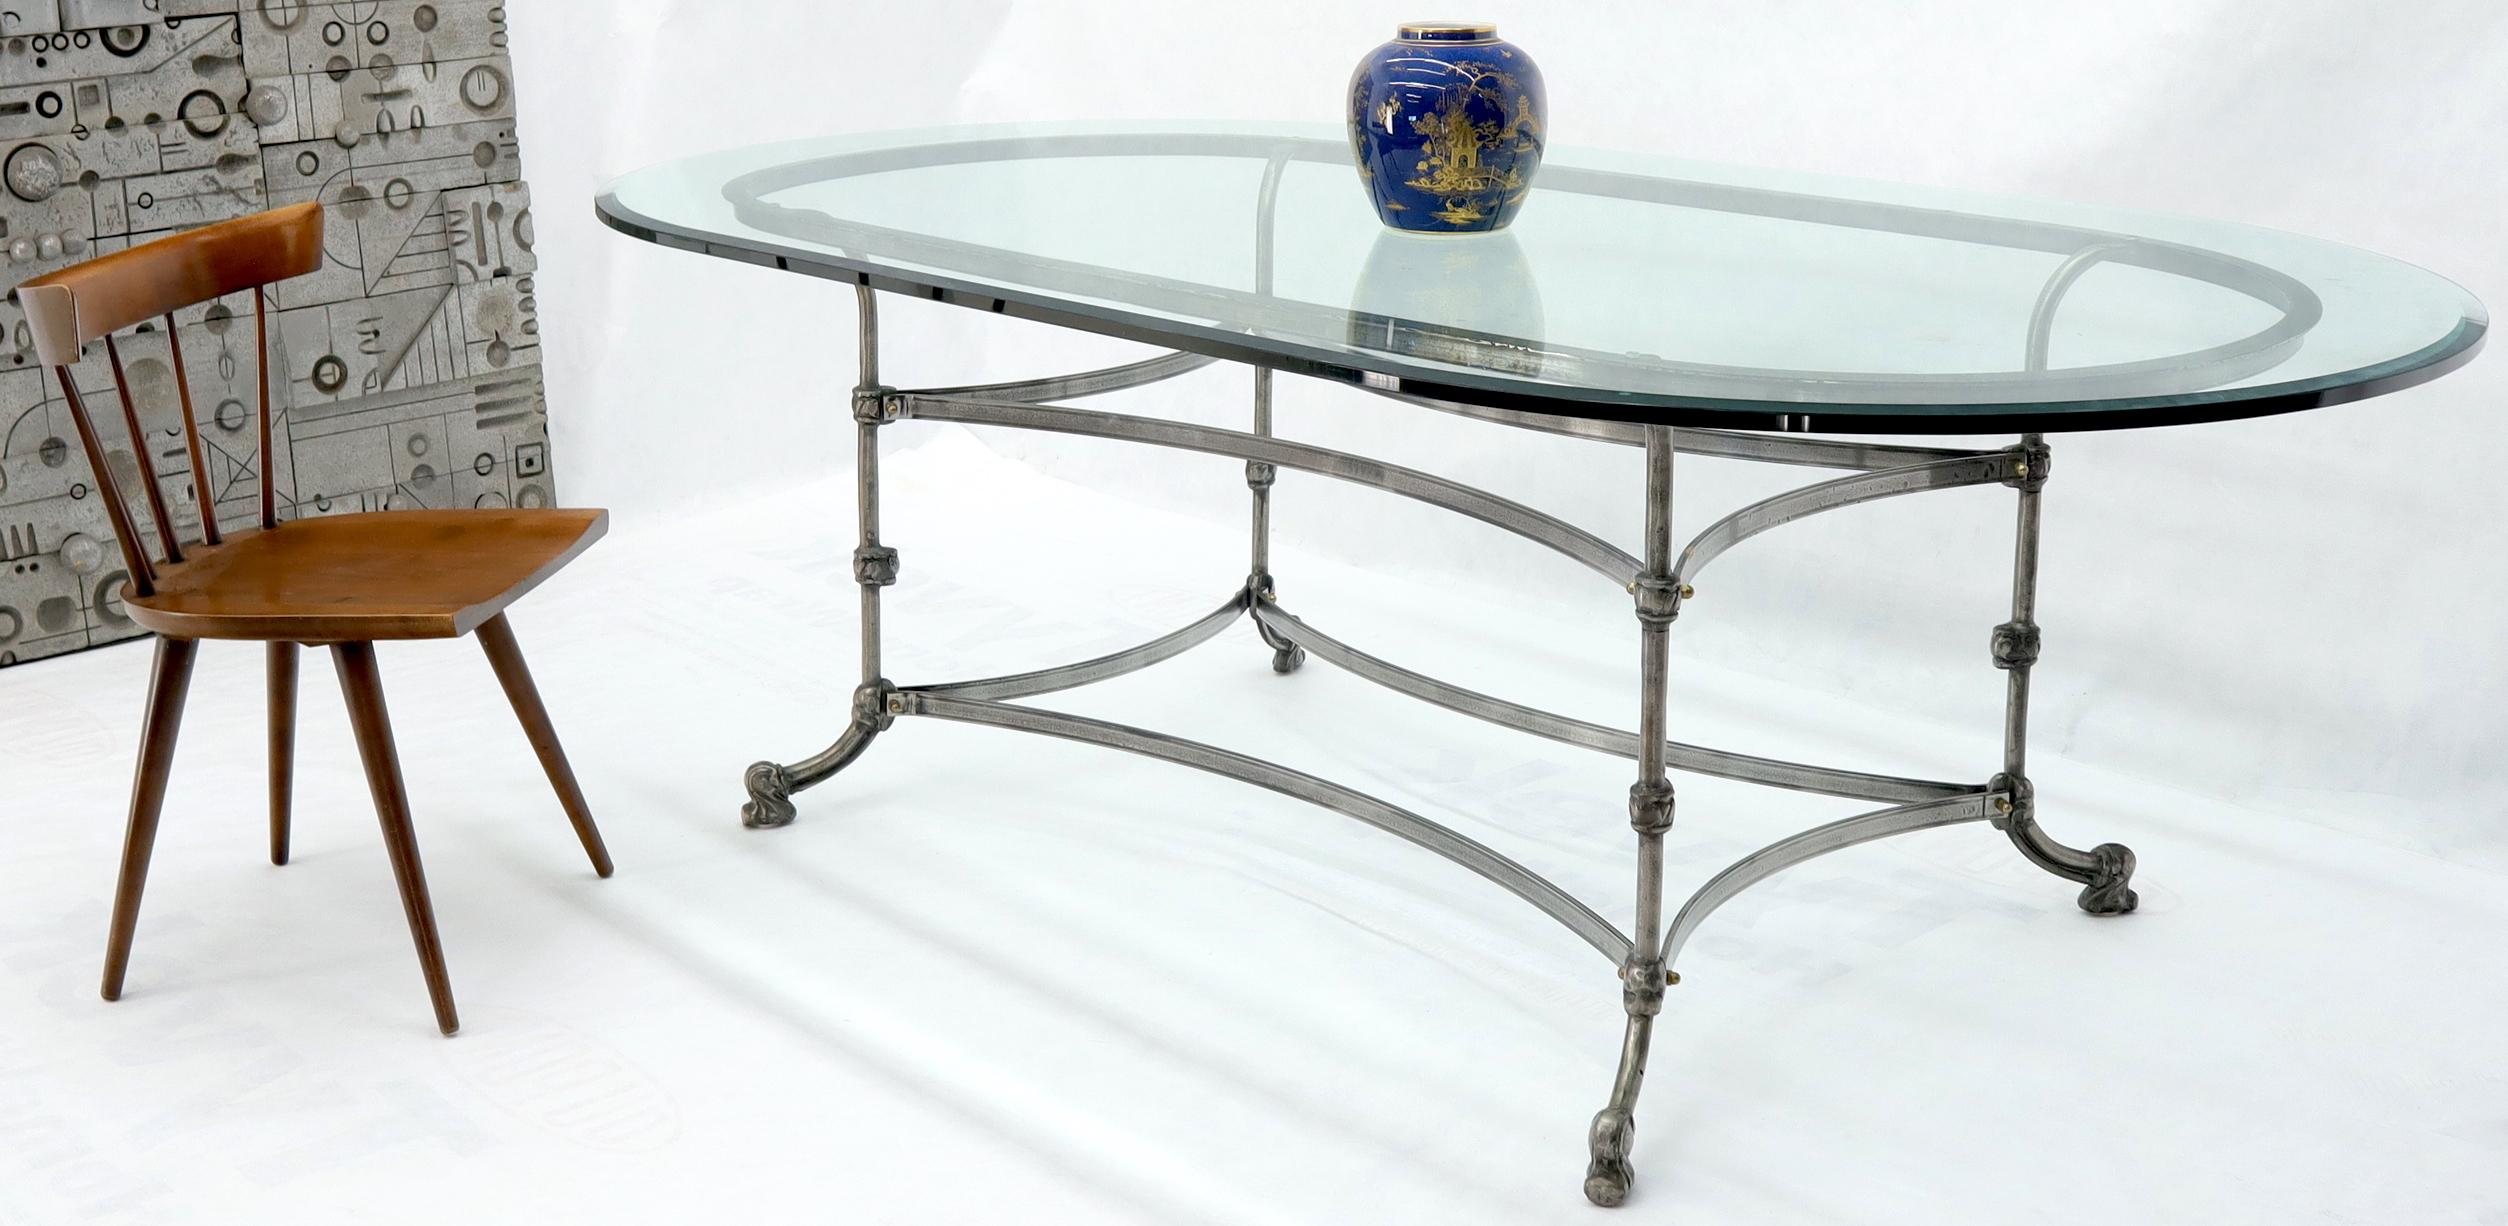 Decorative large forged metal base thick glass racetrack oval shape top dining conference table. Heavy and sturdy nice looking dining table.